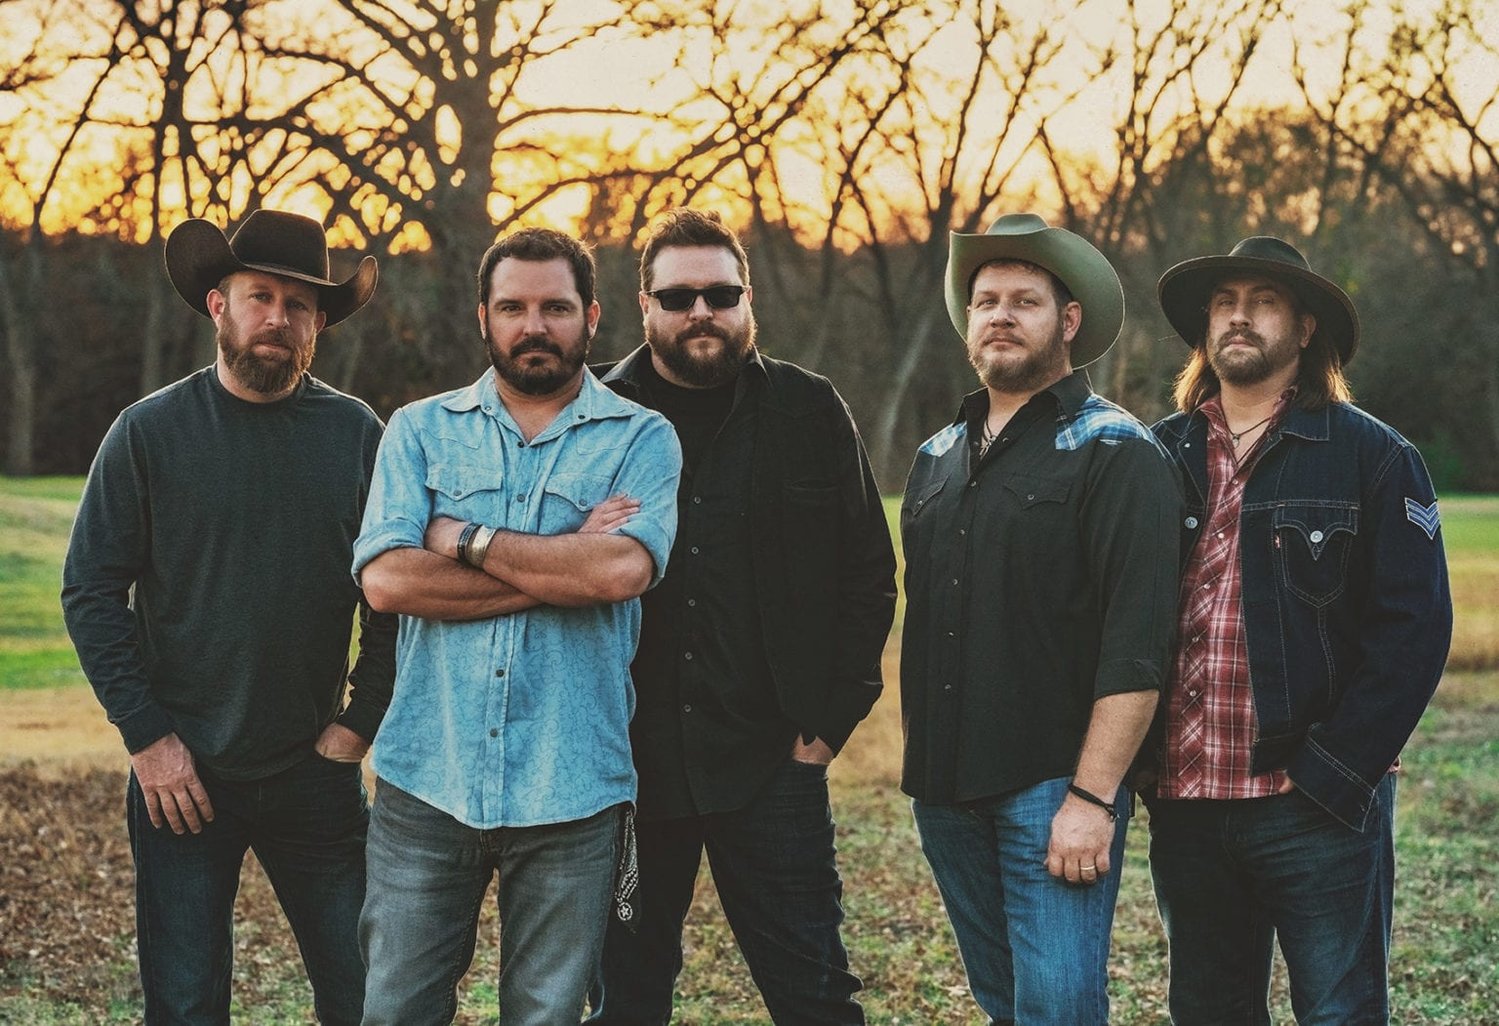 Reckless Kelly will be one of the main musical groups performing Saturday, Oct. 2, and they have a large, loyal following which comes out to see them play.